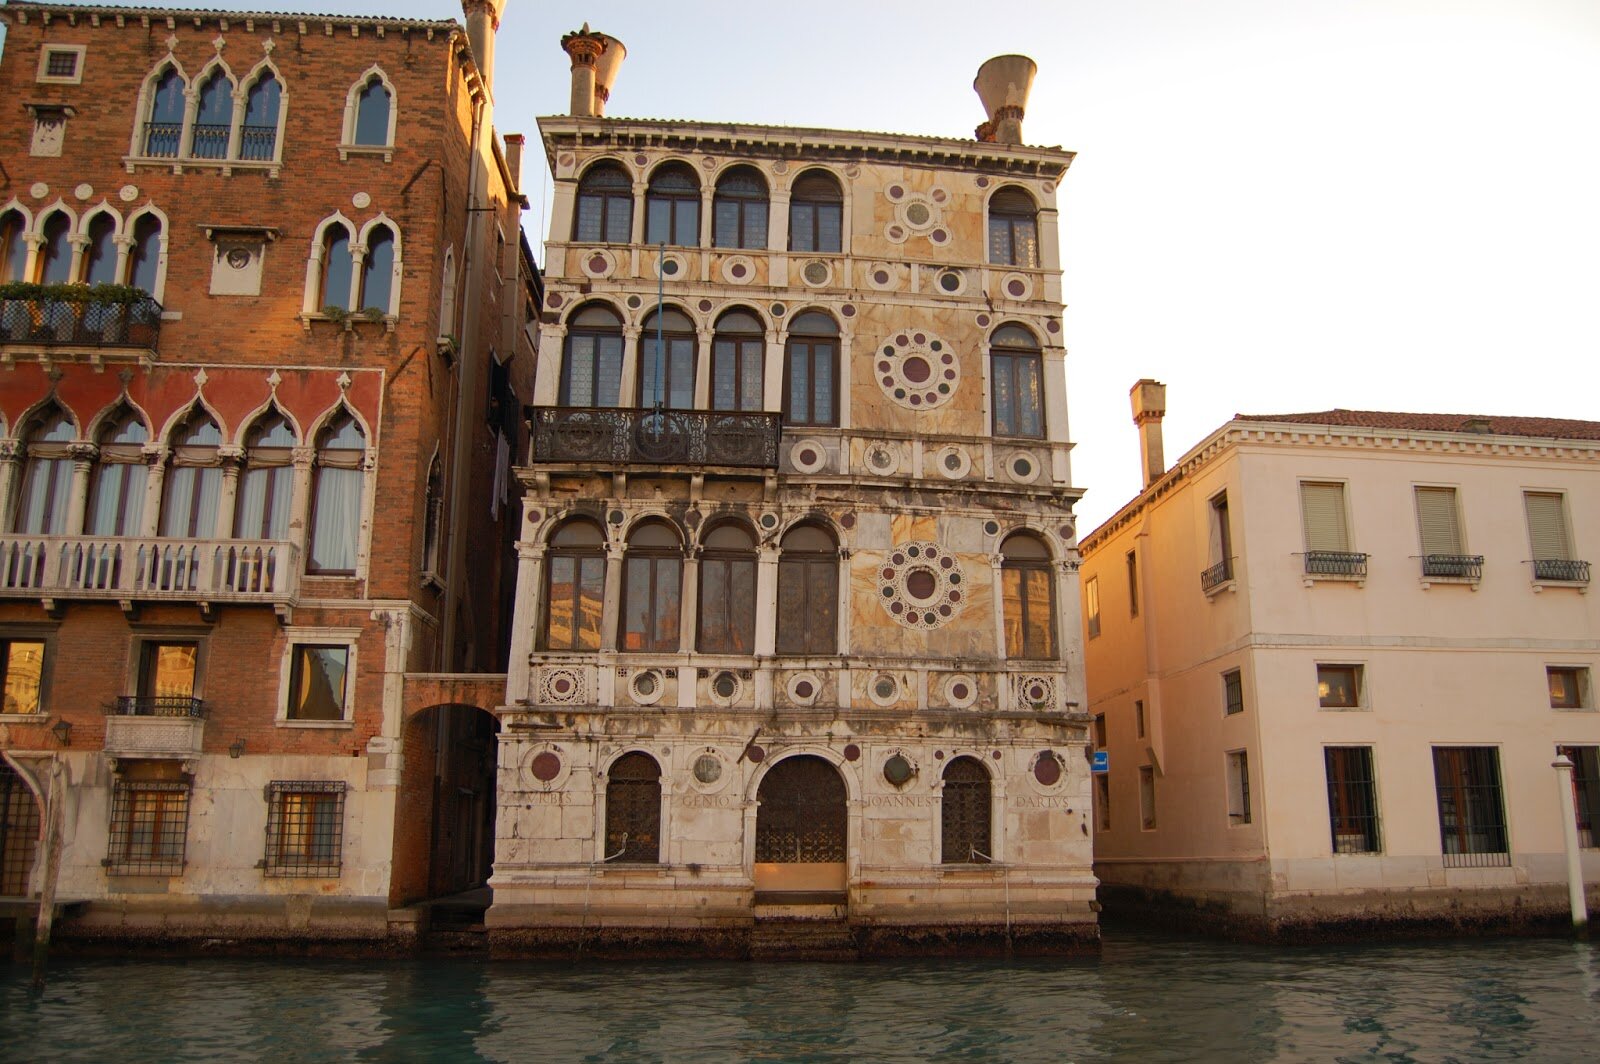 ornate building with arched windows on water